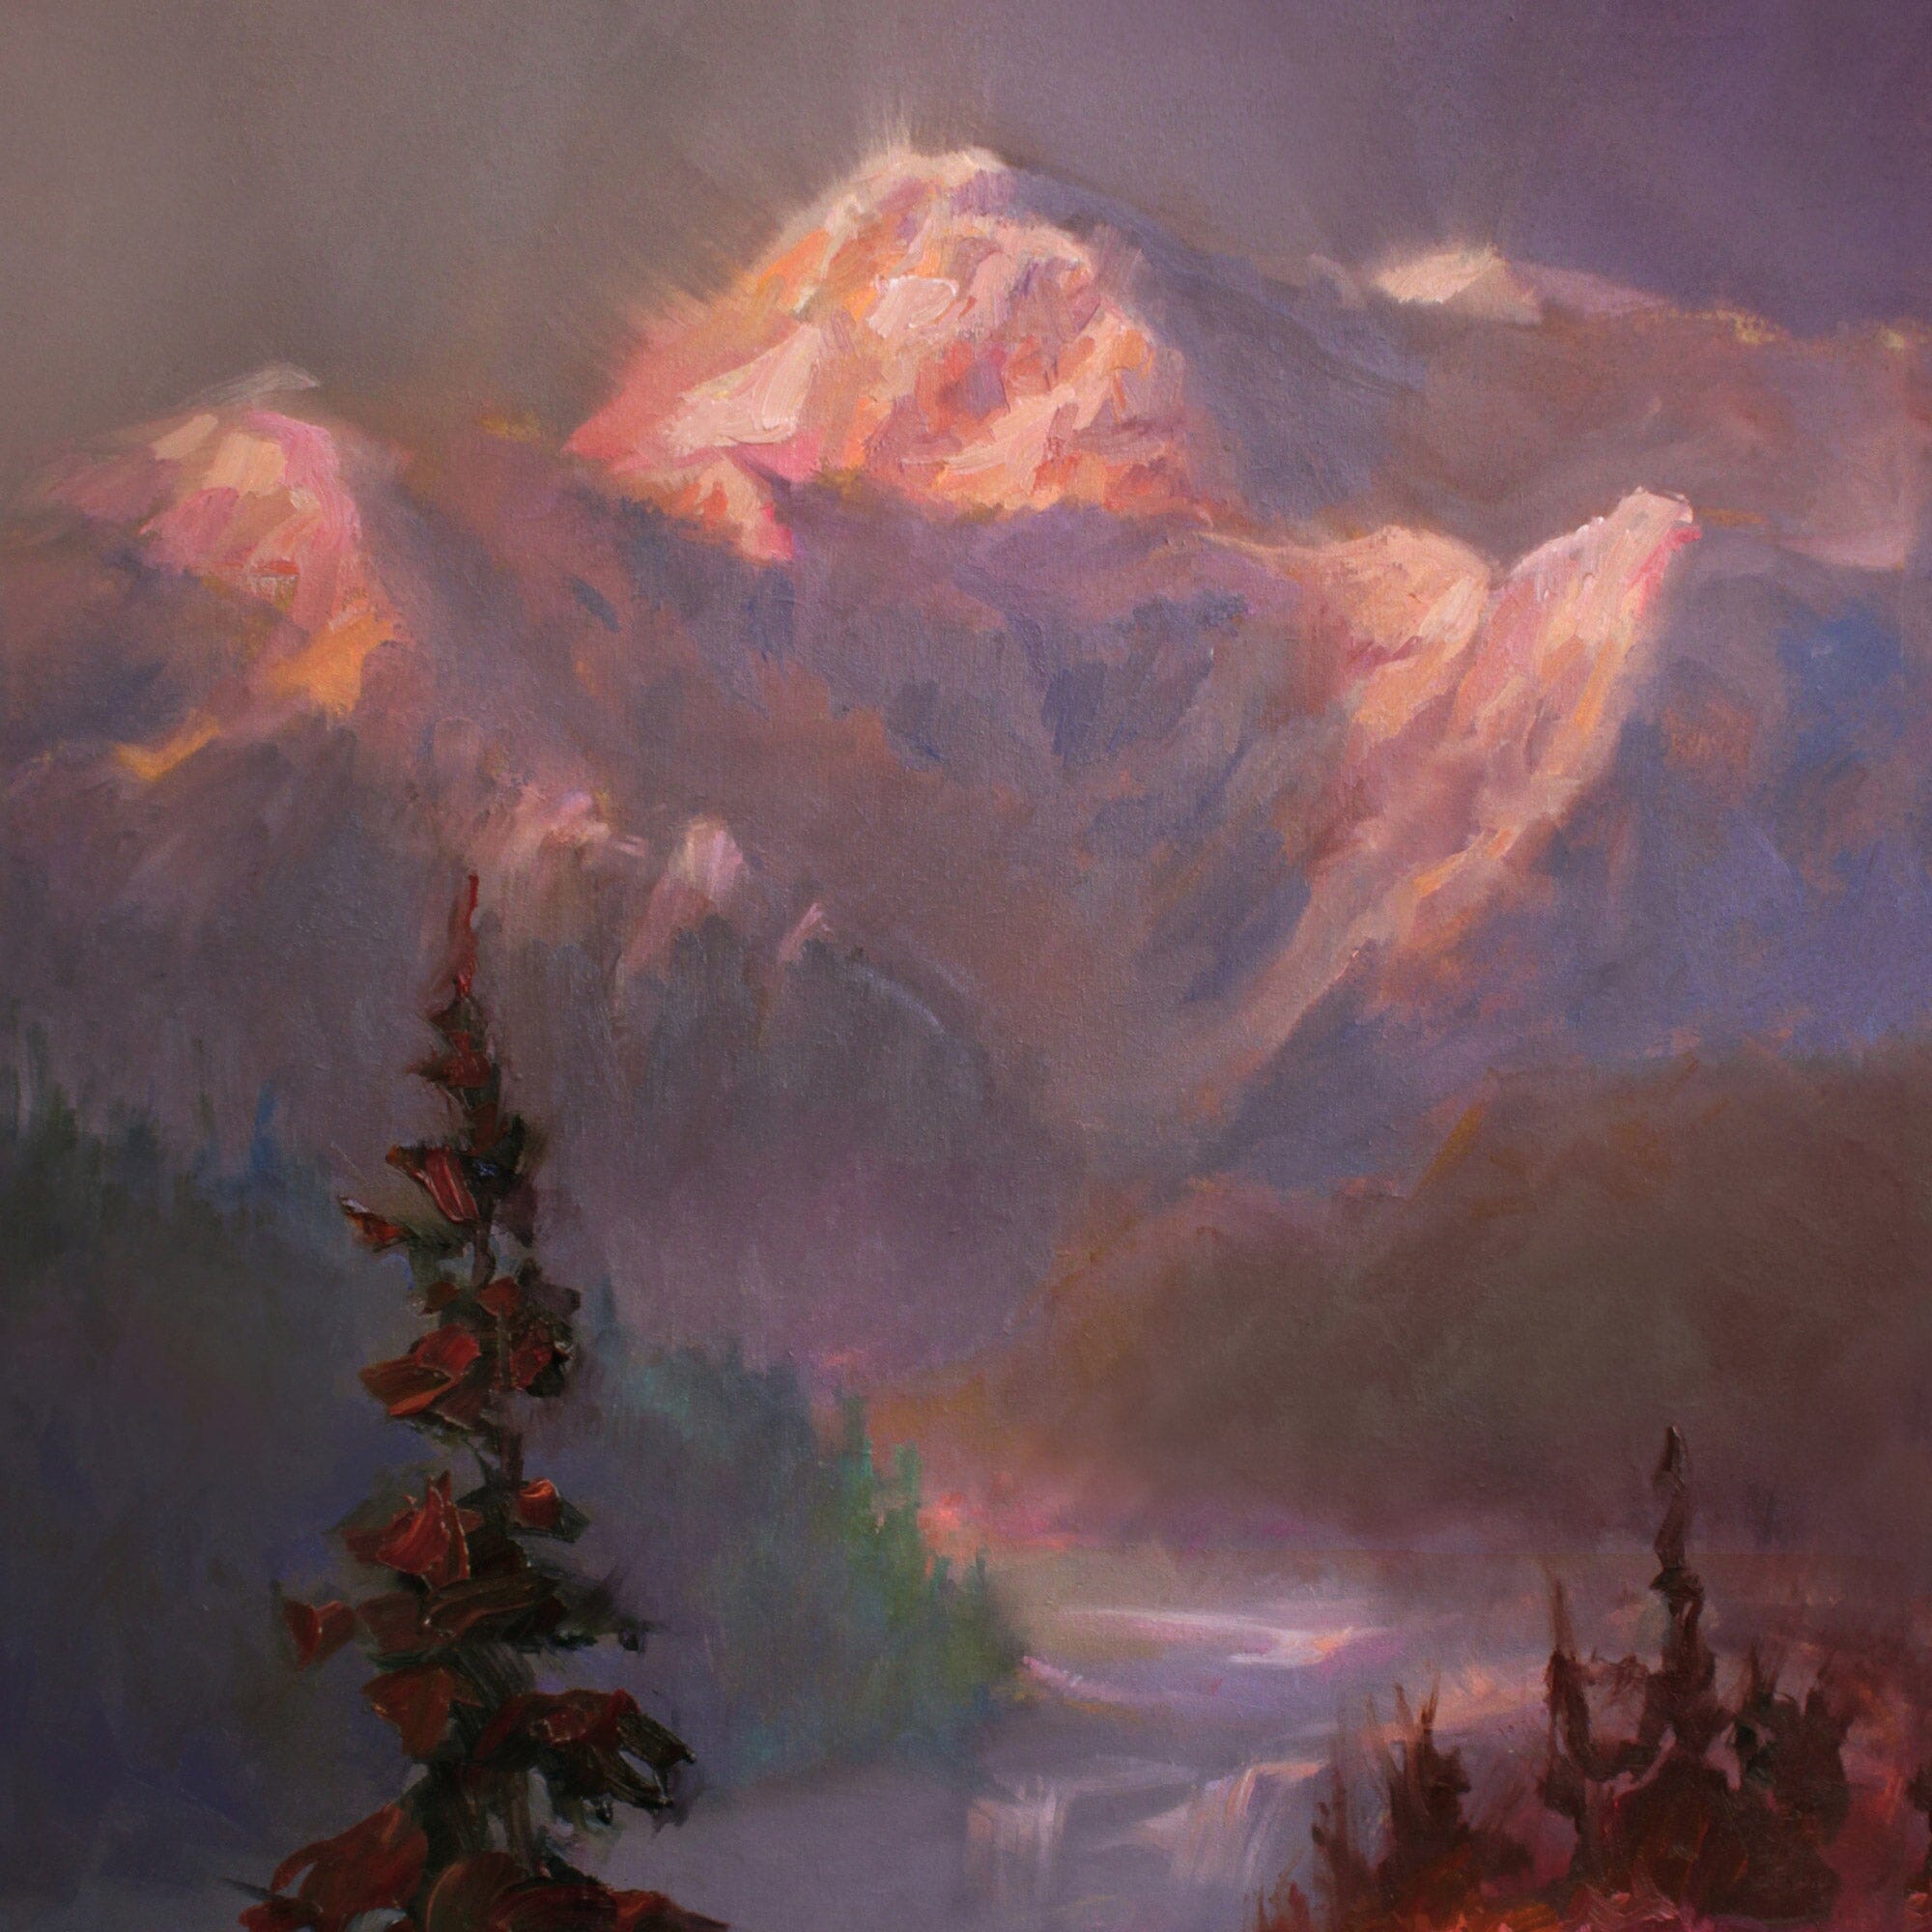 Alaska Art Landscape Painting on Canvas of Denali scenery with alpineglow by artist Karen Whitworth